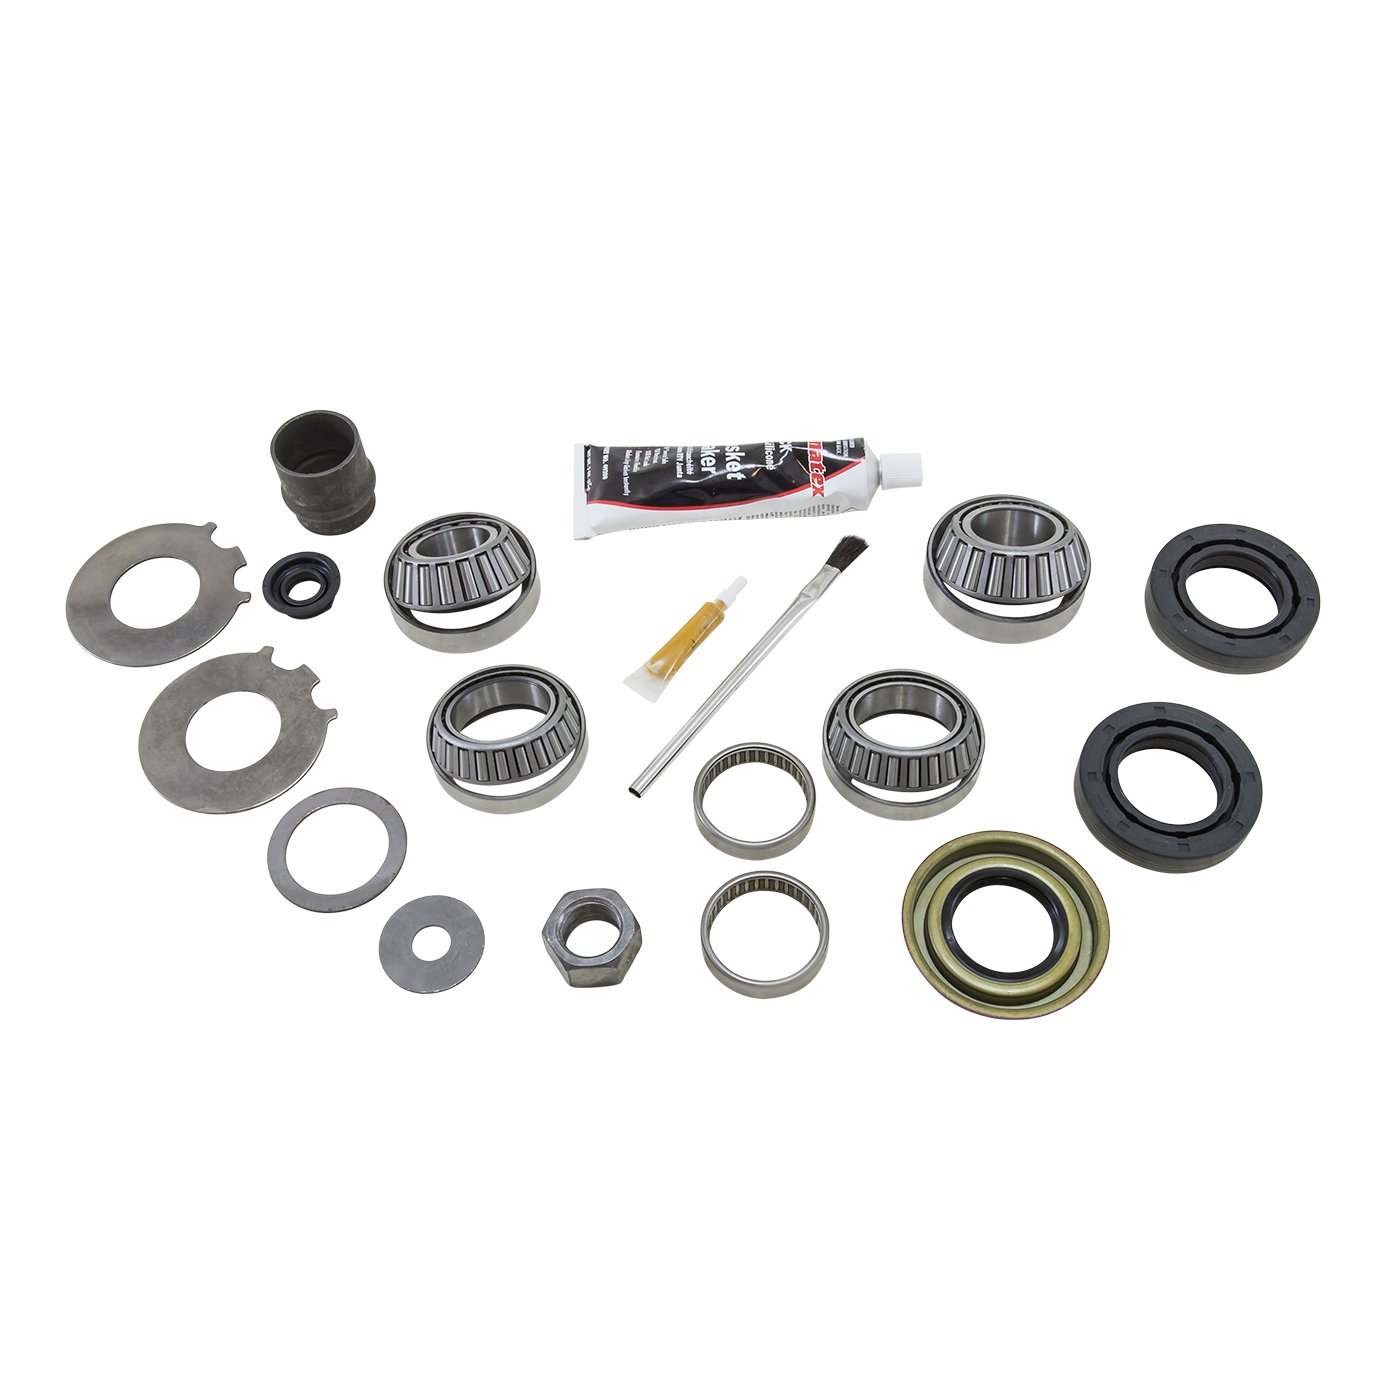 Bearing Install Kit For '83-'97 GM S10 And S15 Ifs Differential